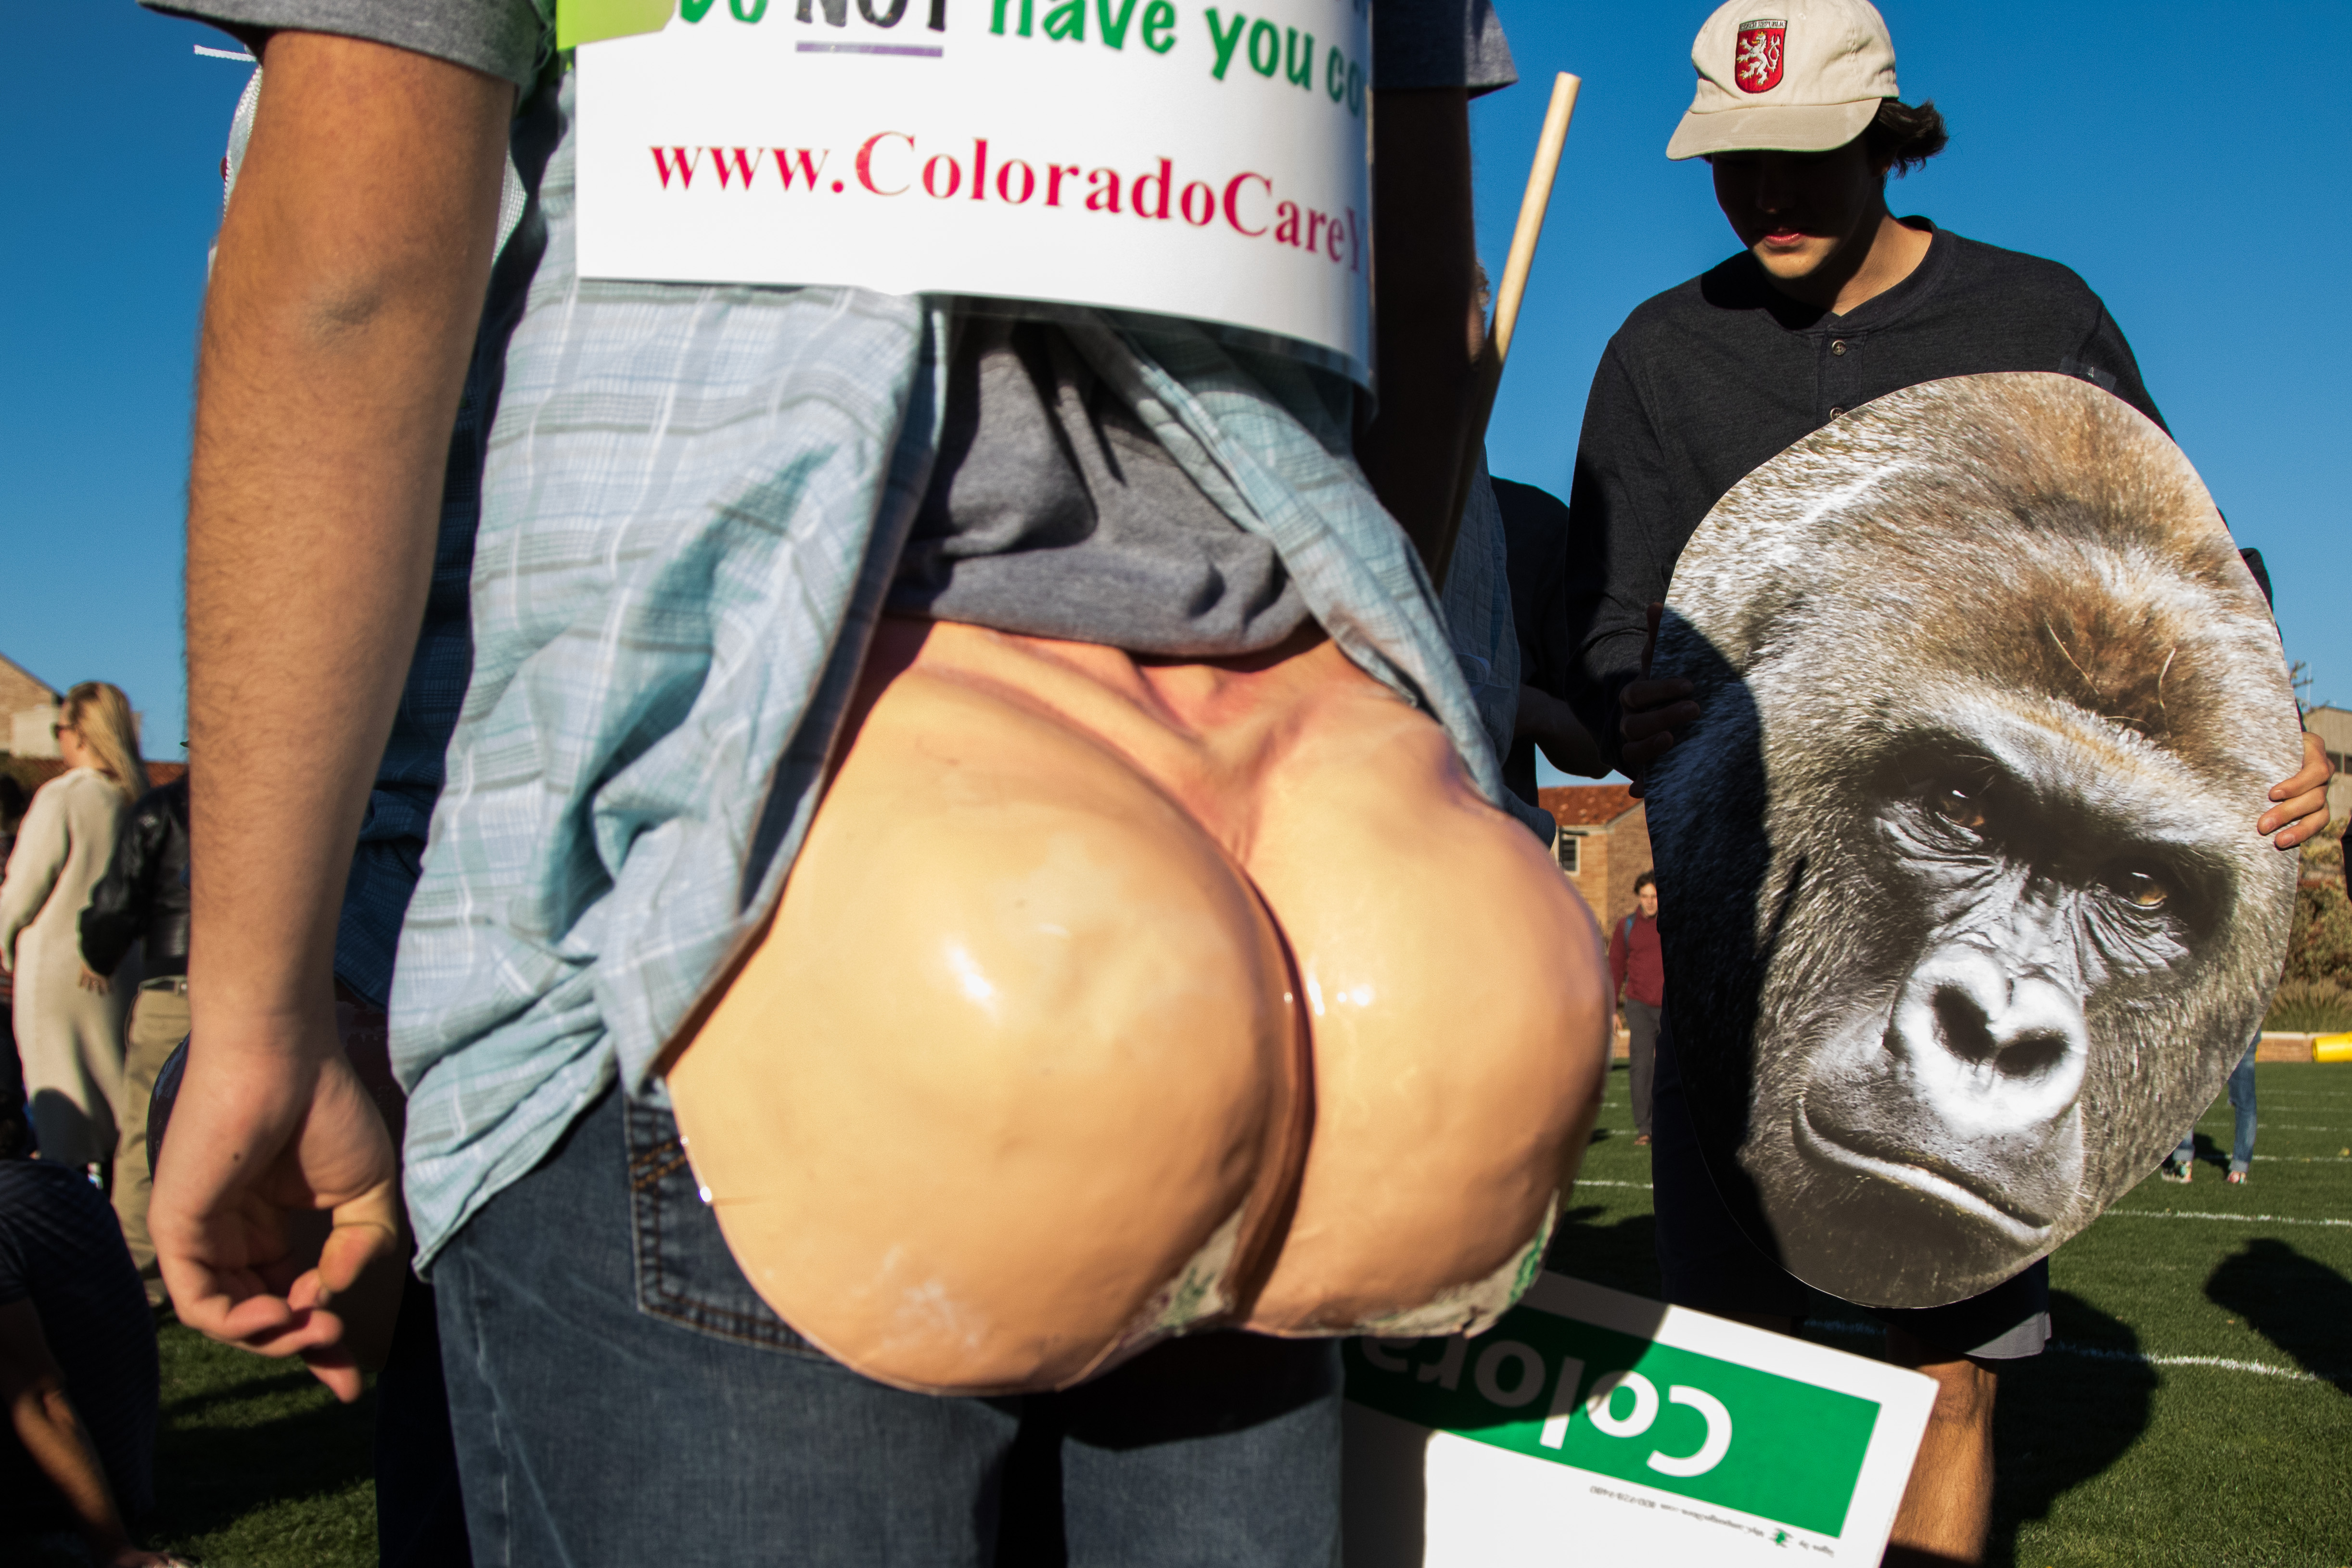 Colorado Car supporters wear fake butts to show their support of amendment 69 while a student holds a Harambe poster on Farrand Field. Harambe, the gorilla killed in the Cincinnati zoo, became a rallying cry for many at CU during the election. More so as a joke than for animal rights, Harambe was remembered through signs and even themed parties. (Jackson Barnett/CU Independent)